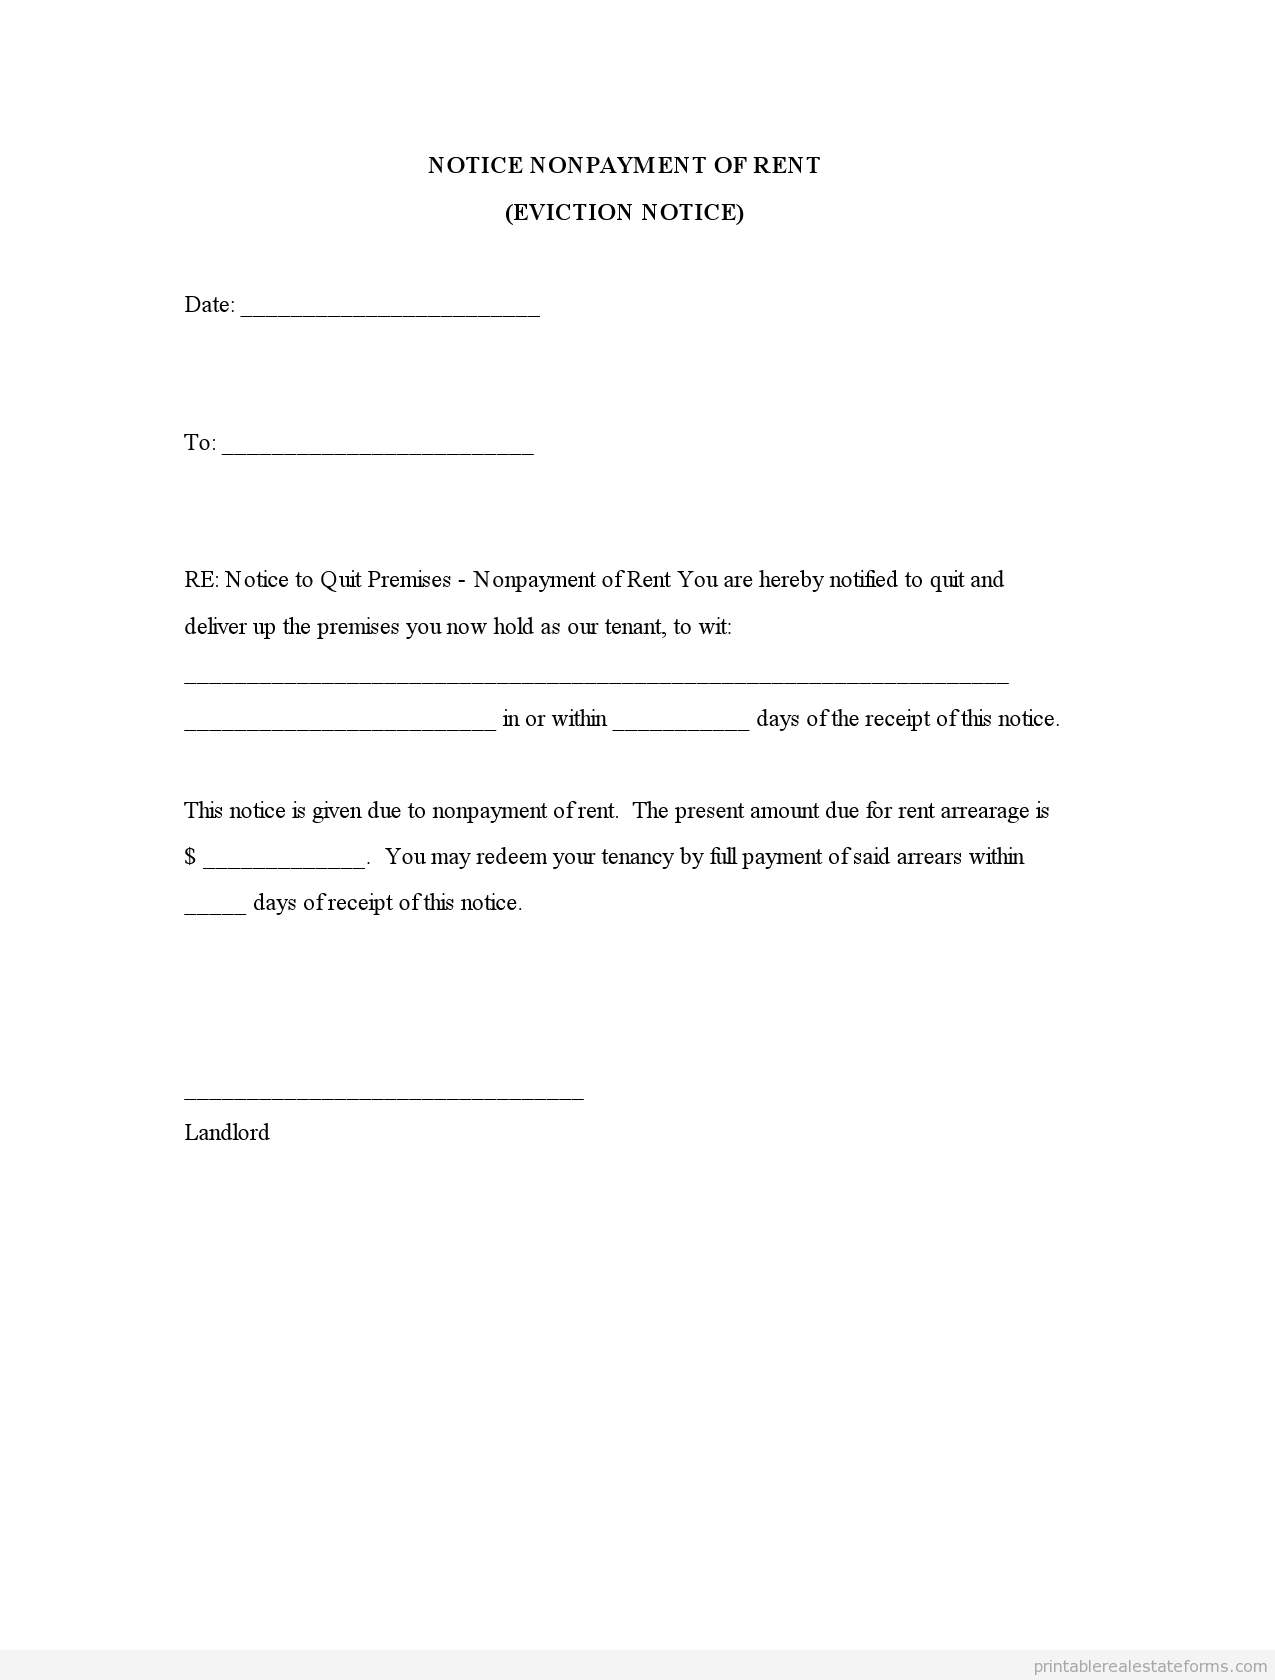 Free Printable Eviction Notice | Free Notice Nonpayment Of Rent Form - Free Printable Blank Eviction Notice